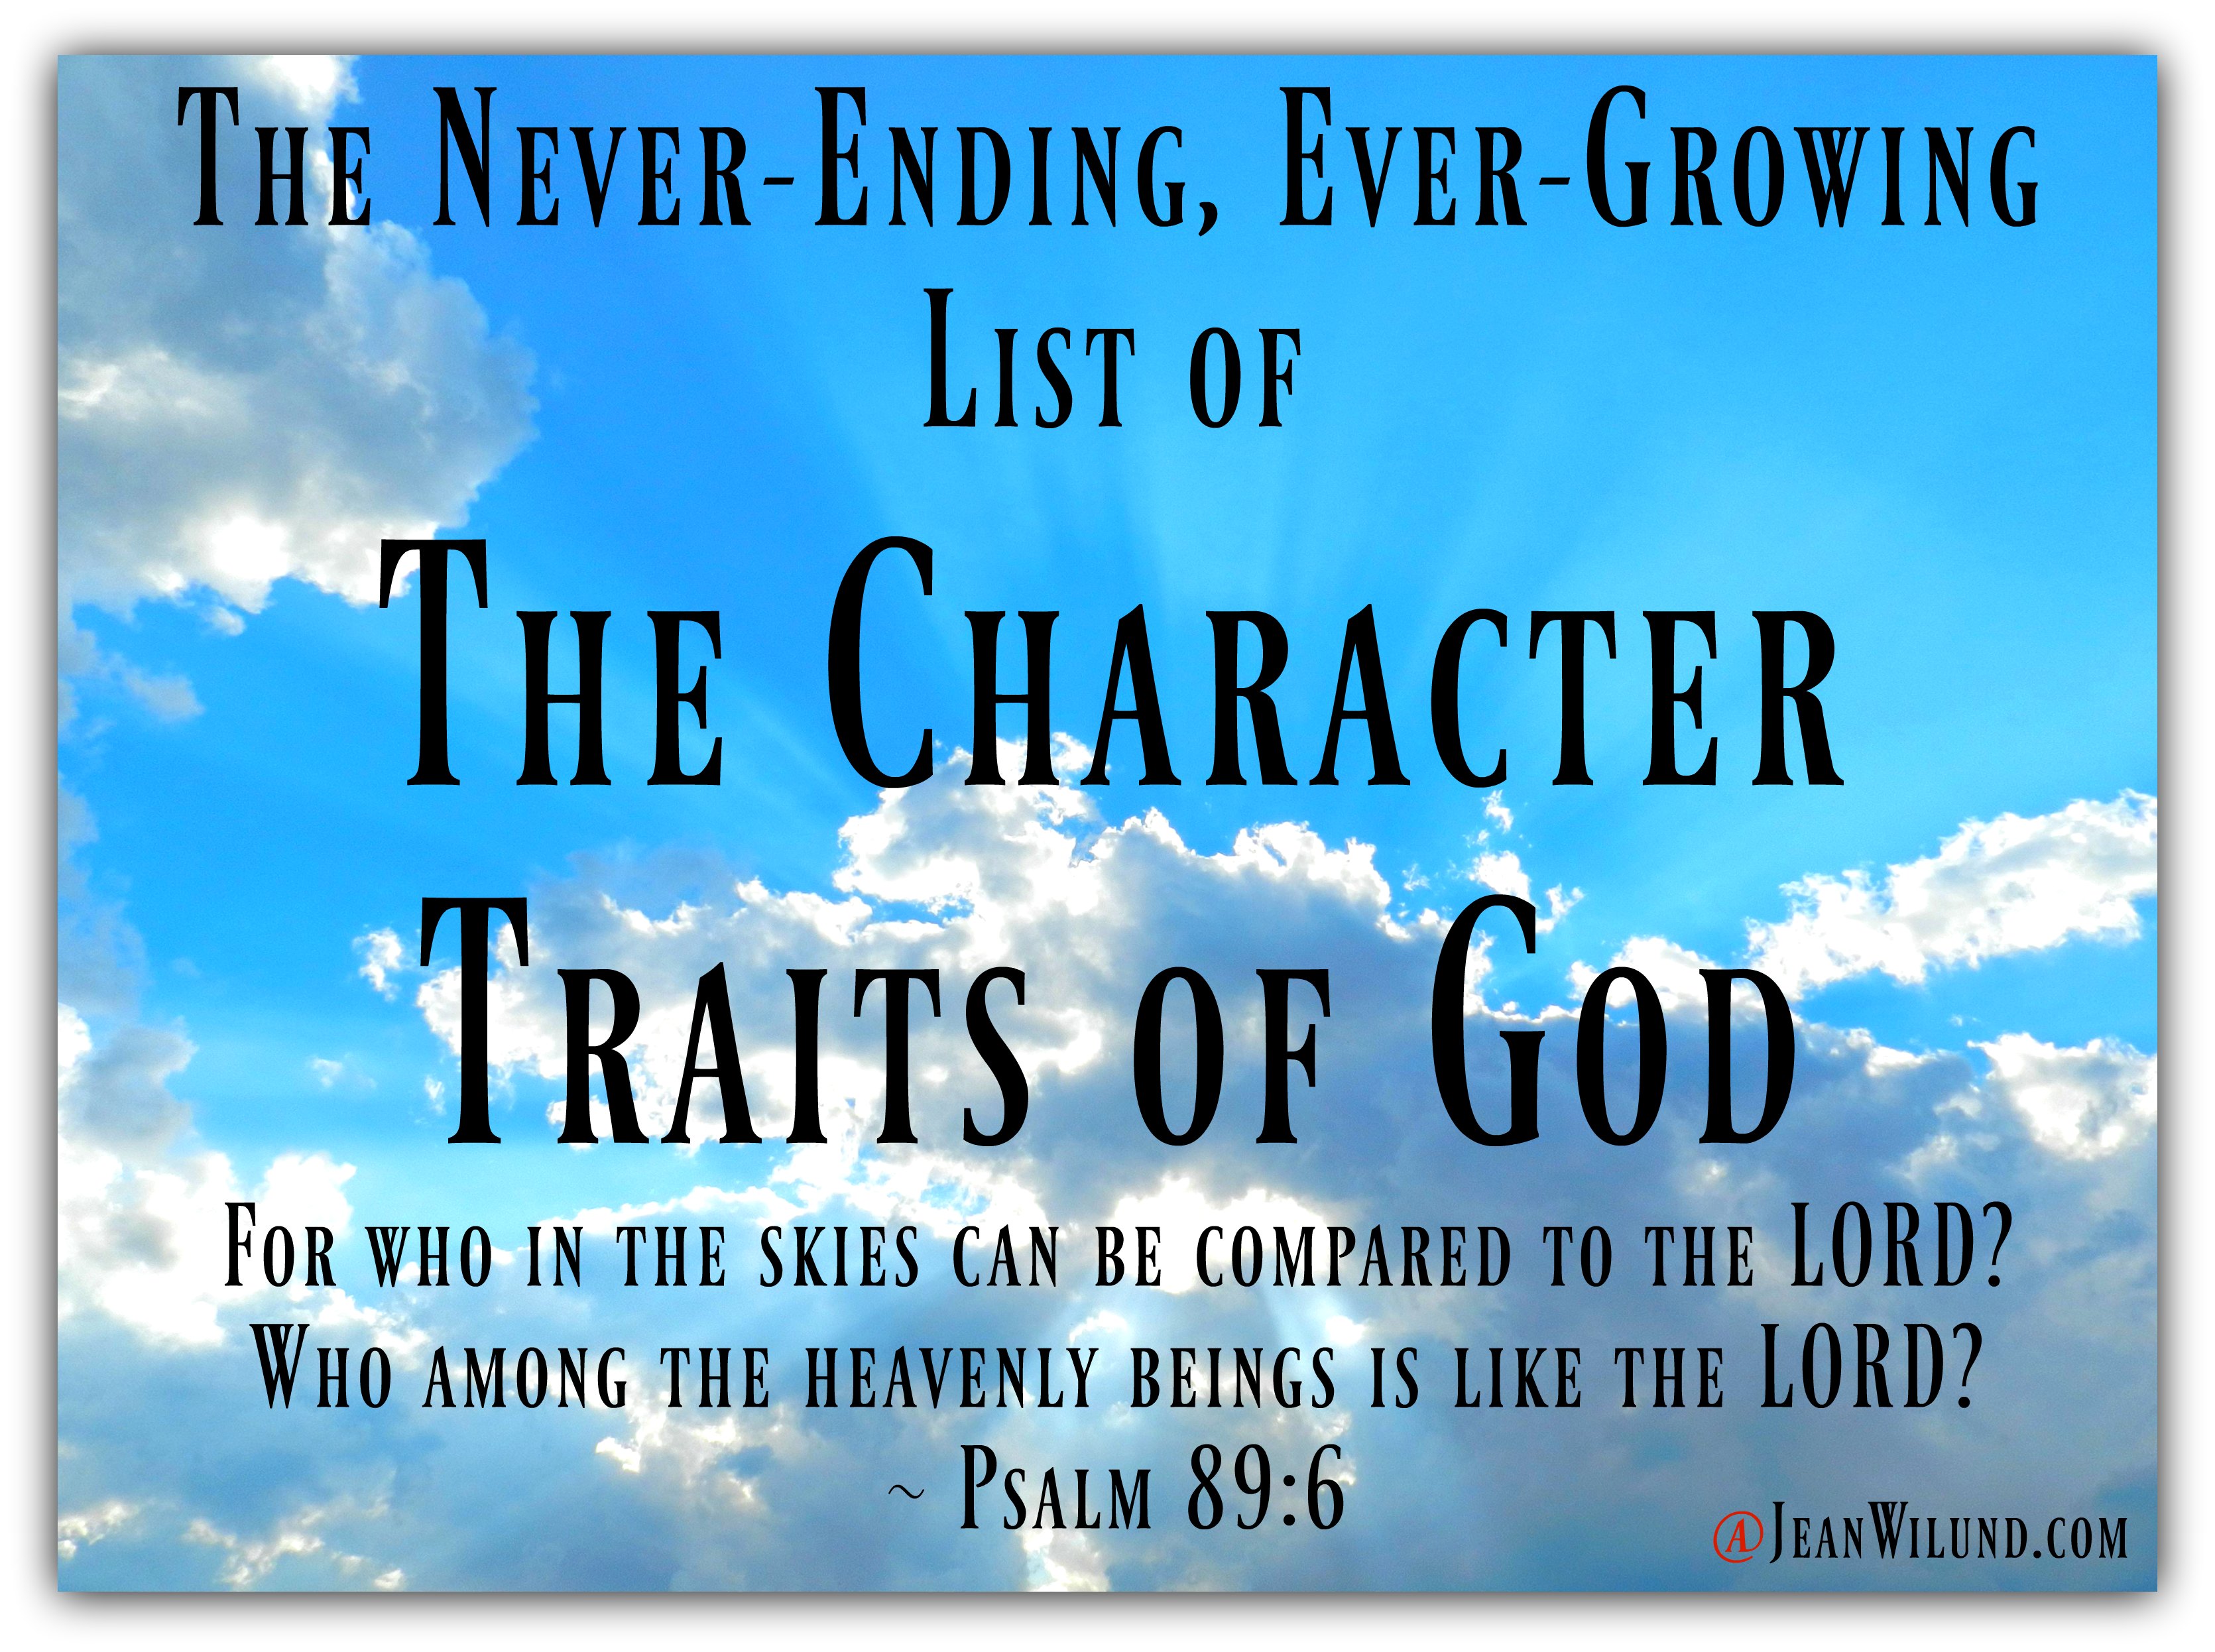 essay on god's character